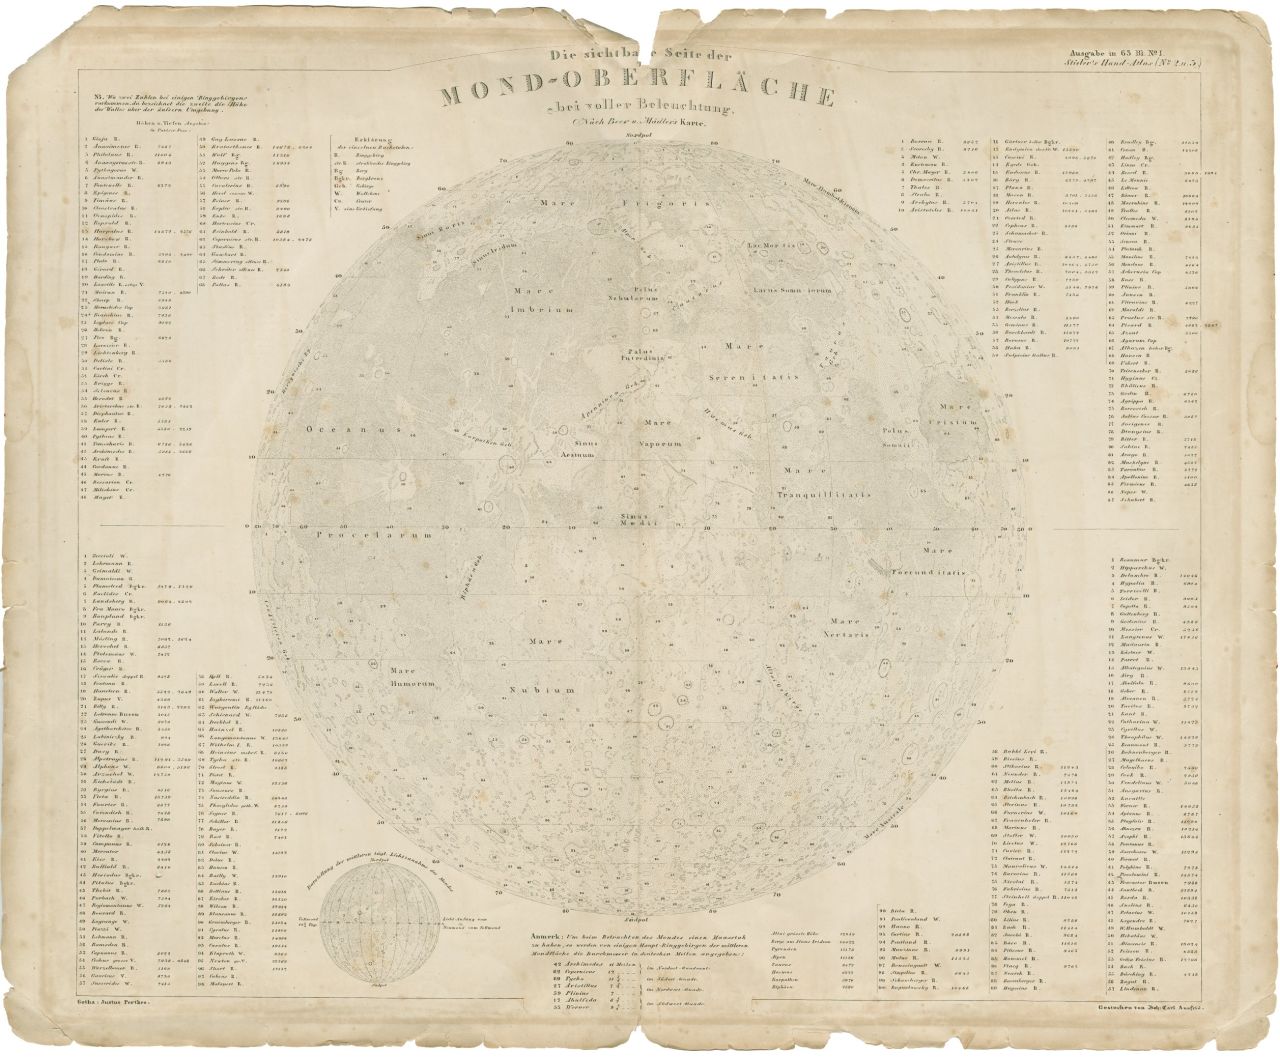 <strong><em>Wilhelm Beer and Johann Heinrich von Mädler, 1834-36</em></strong><br /><br />This exceptionally detailed map was produced by German astronomers Wilhelm Beer and Johann Heinrich von Mädler, and was released in quadrants between 1834 and 1836. Their <em>Mappa Selenographica -- </em>shown here as a closeup from Stieler's Hand-Atlas<em> -- </em>is considered the most complete moon map of its age, and would not be surpassed for 40 years.